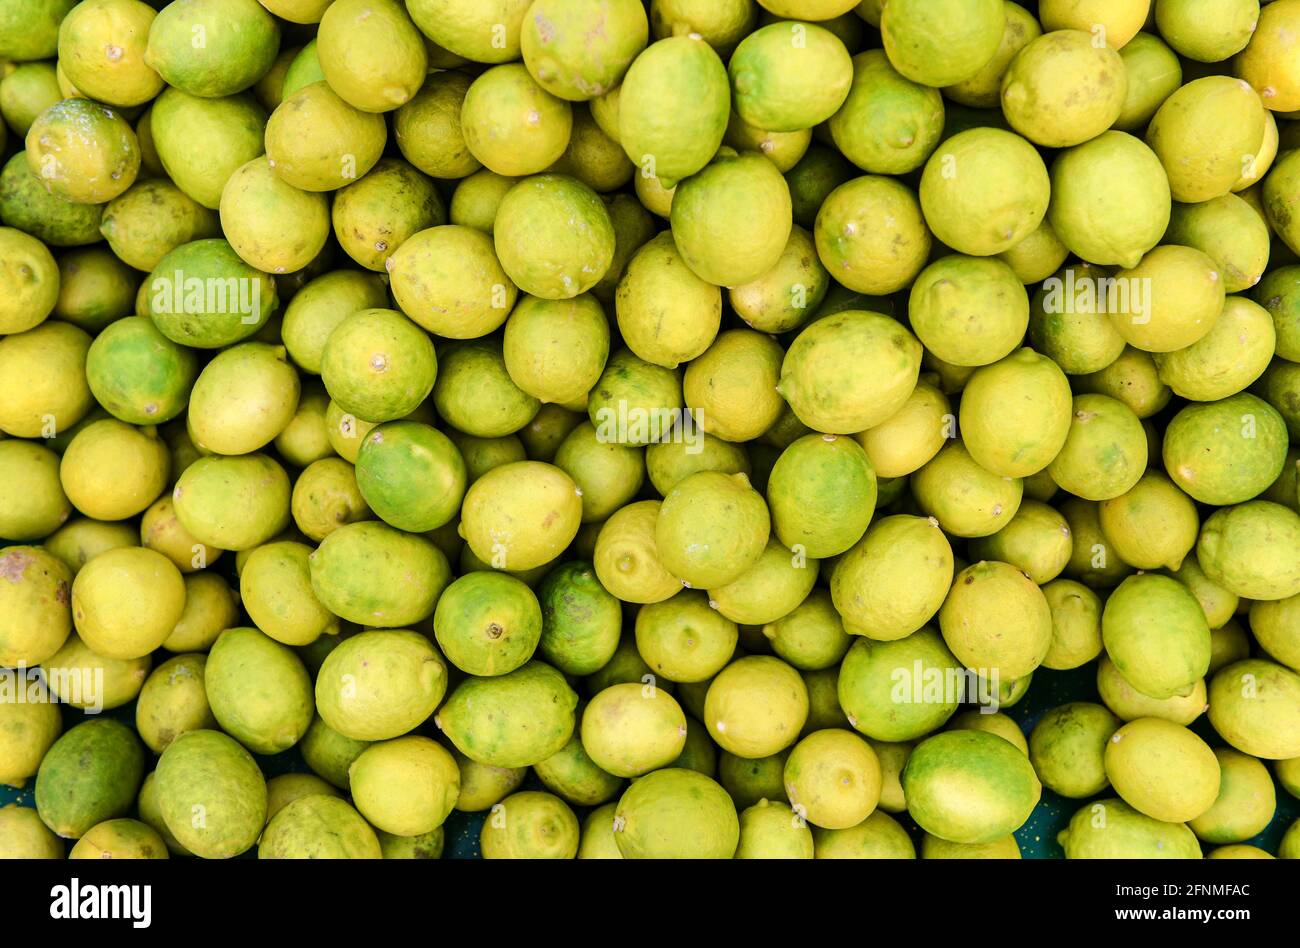 The lemon is a species of small evergreen tree in the flowering plant family Rutaceae Stock Photo